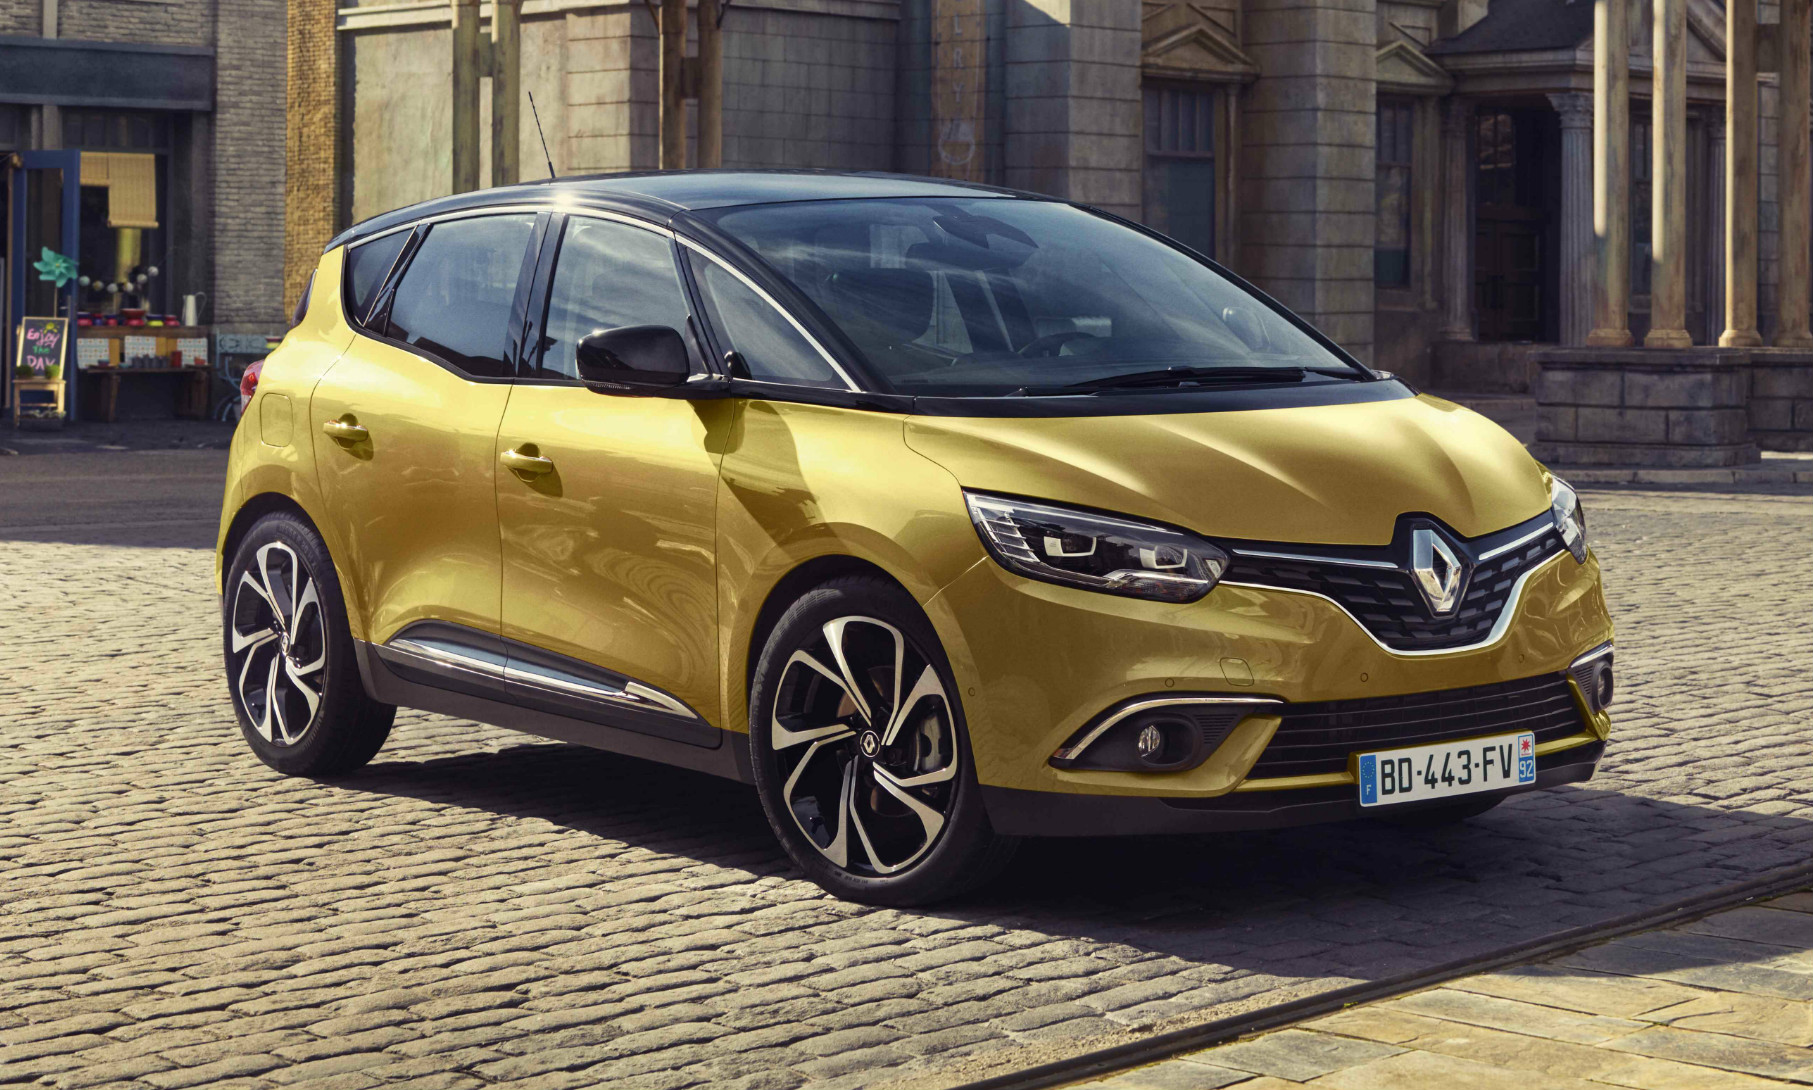 New Renault Scenic  is one of the star cars at the 2016 Geneva motor show